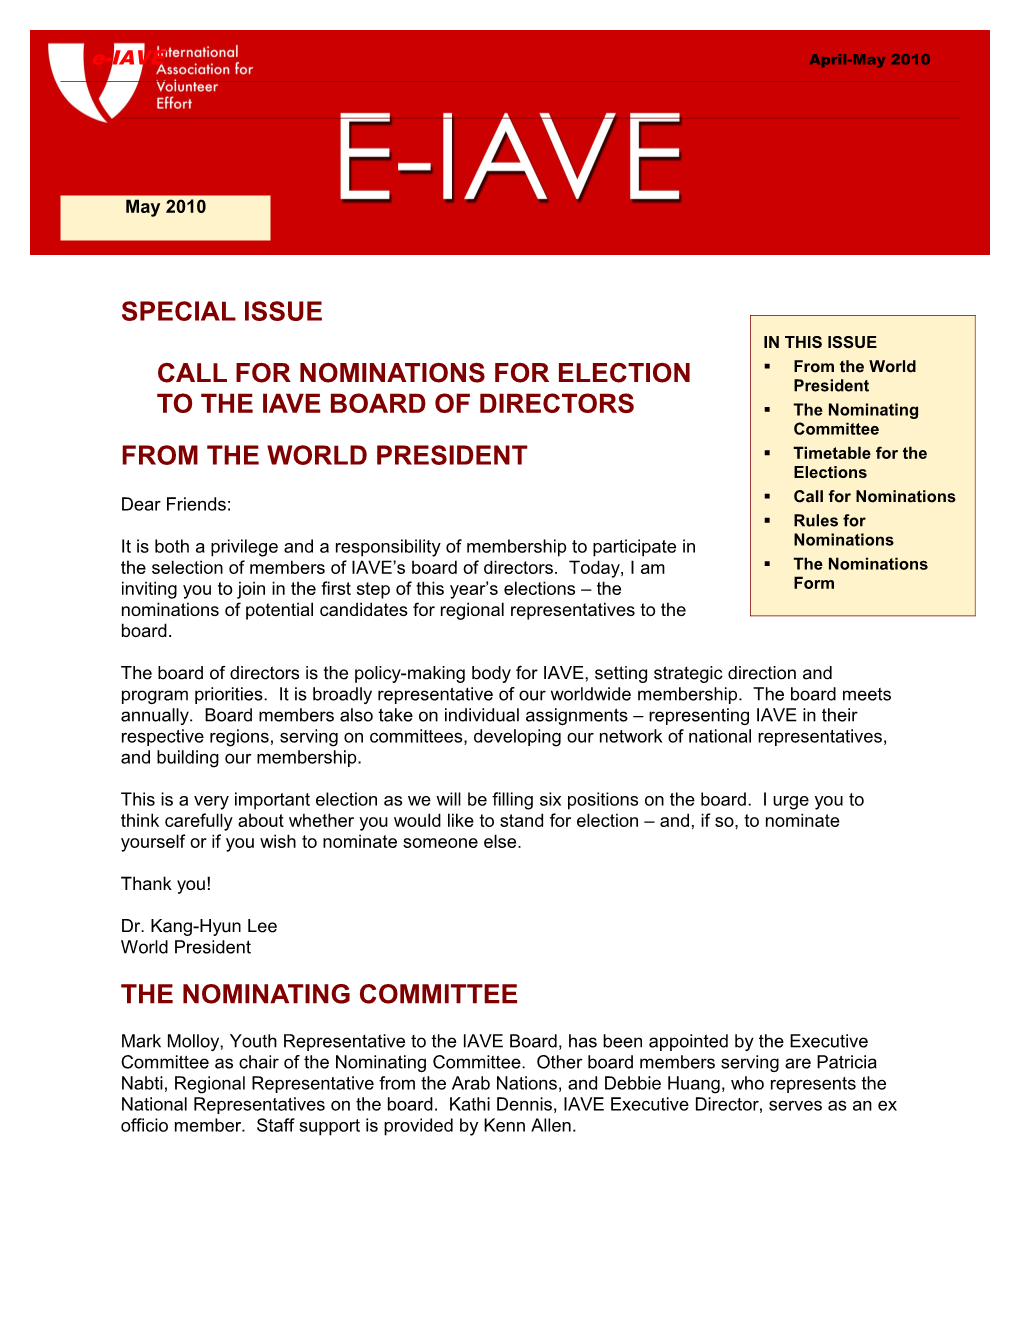 Call for Nominations for Election to the Iave Board of Directors